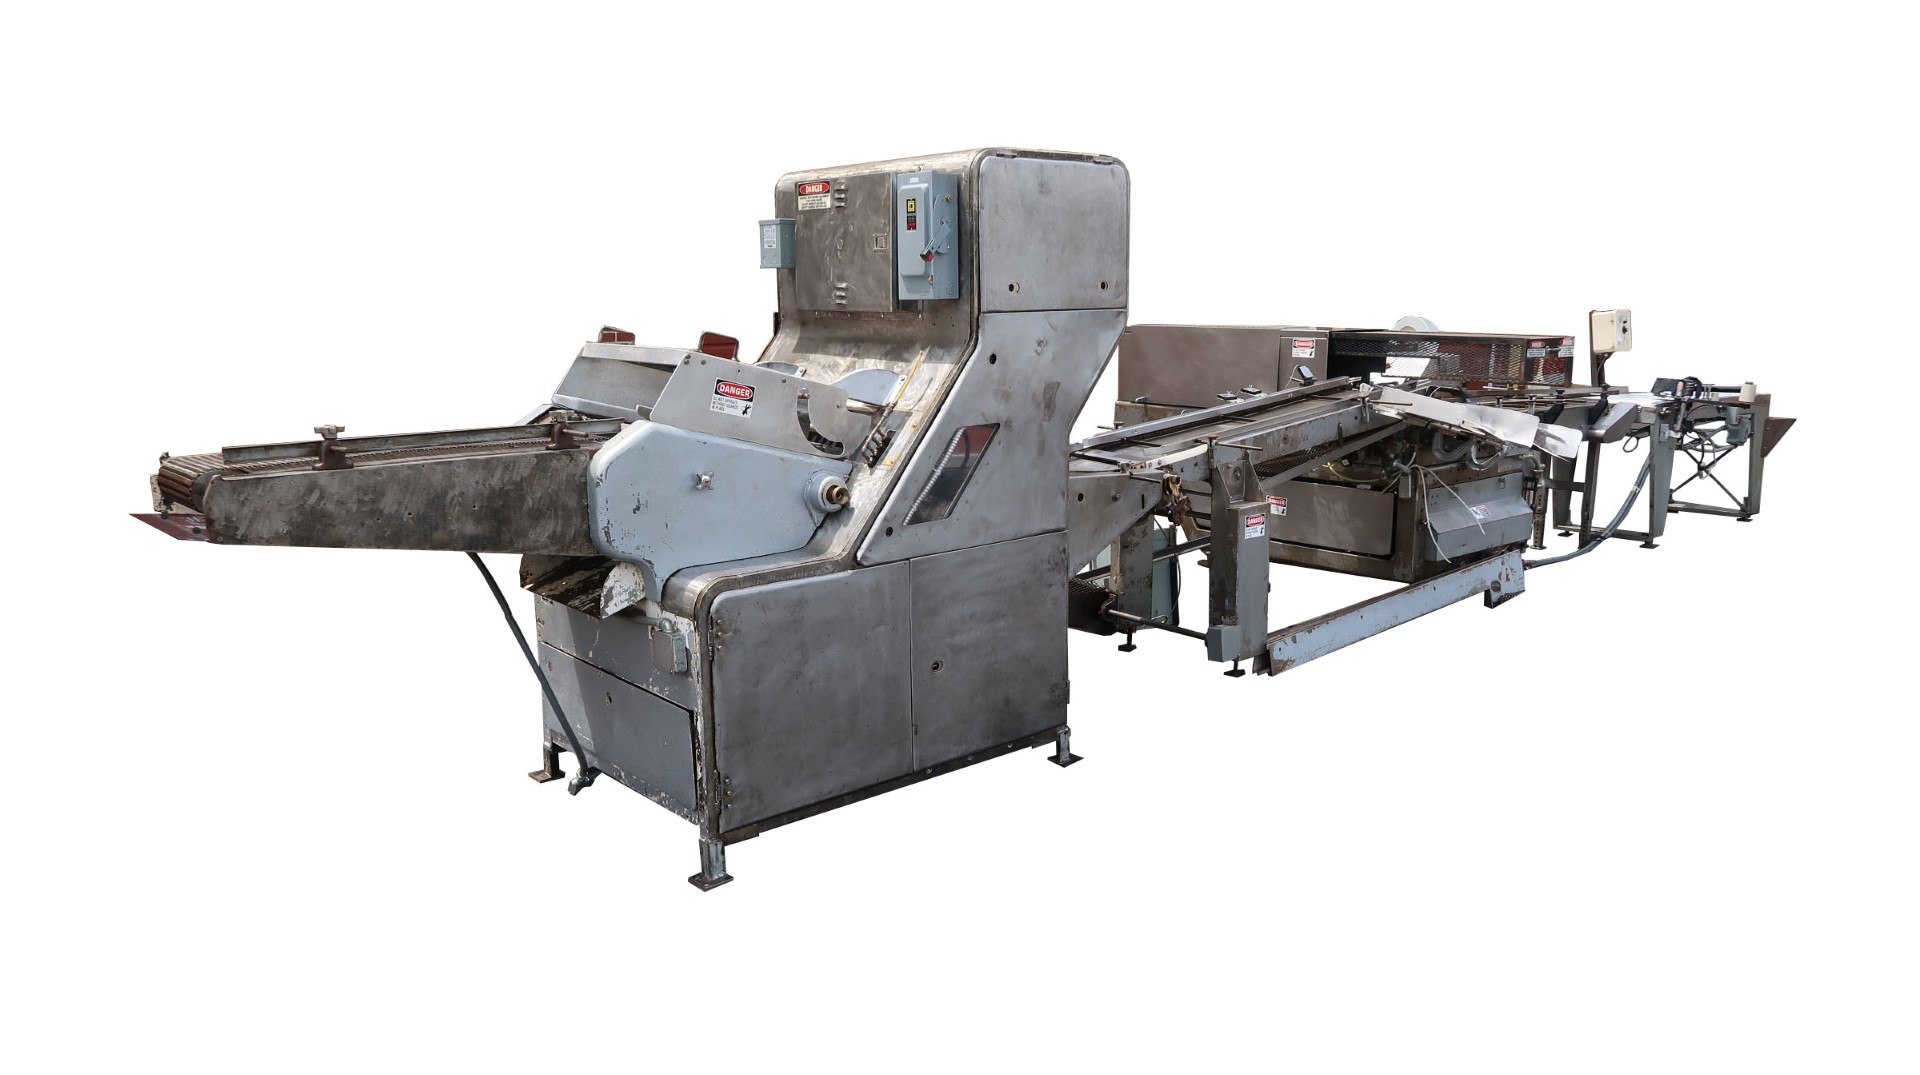 Bettendorf bread band slicer and AMF Mark 50 bread bagger system